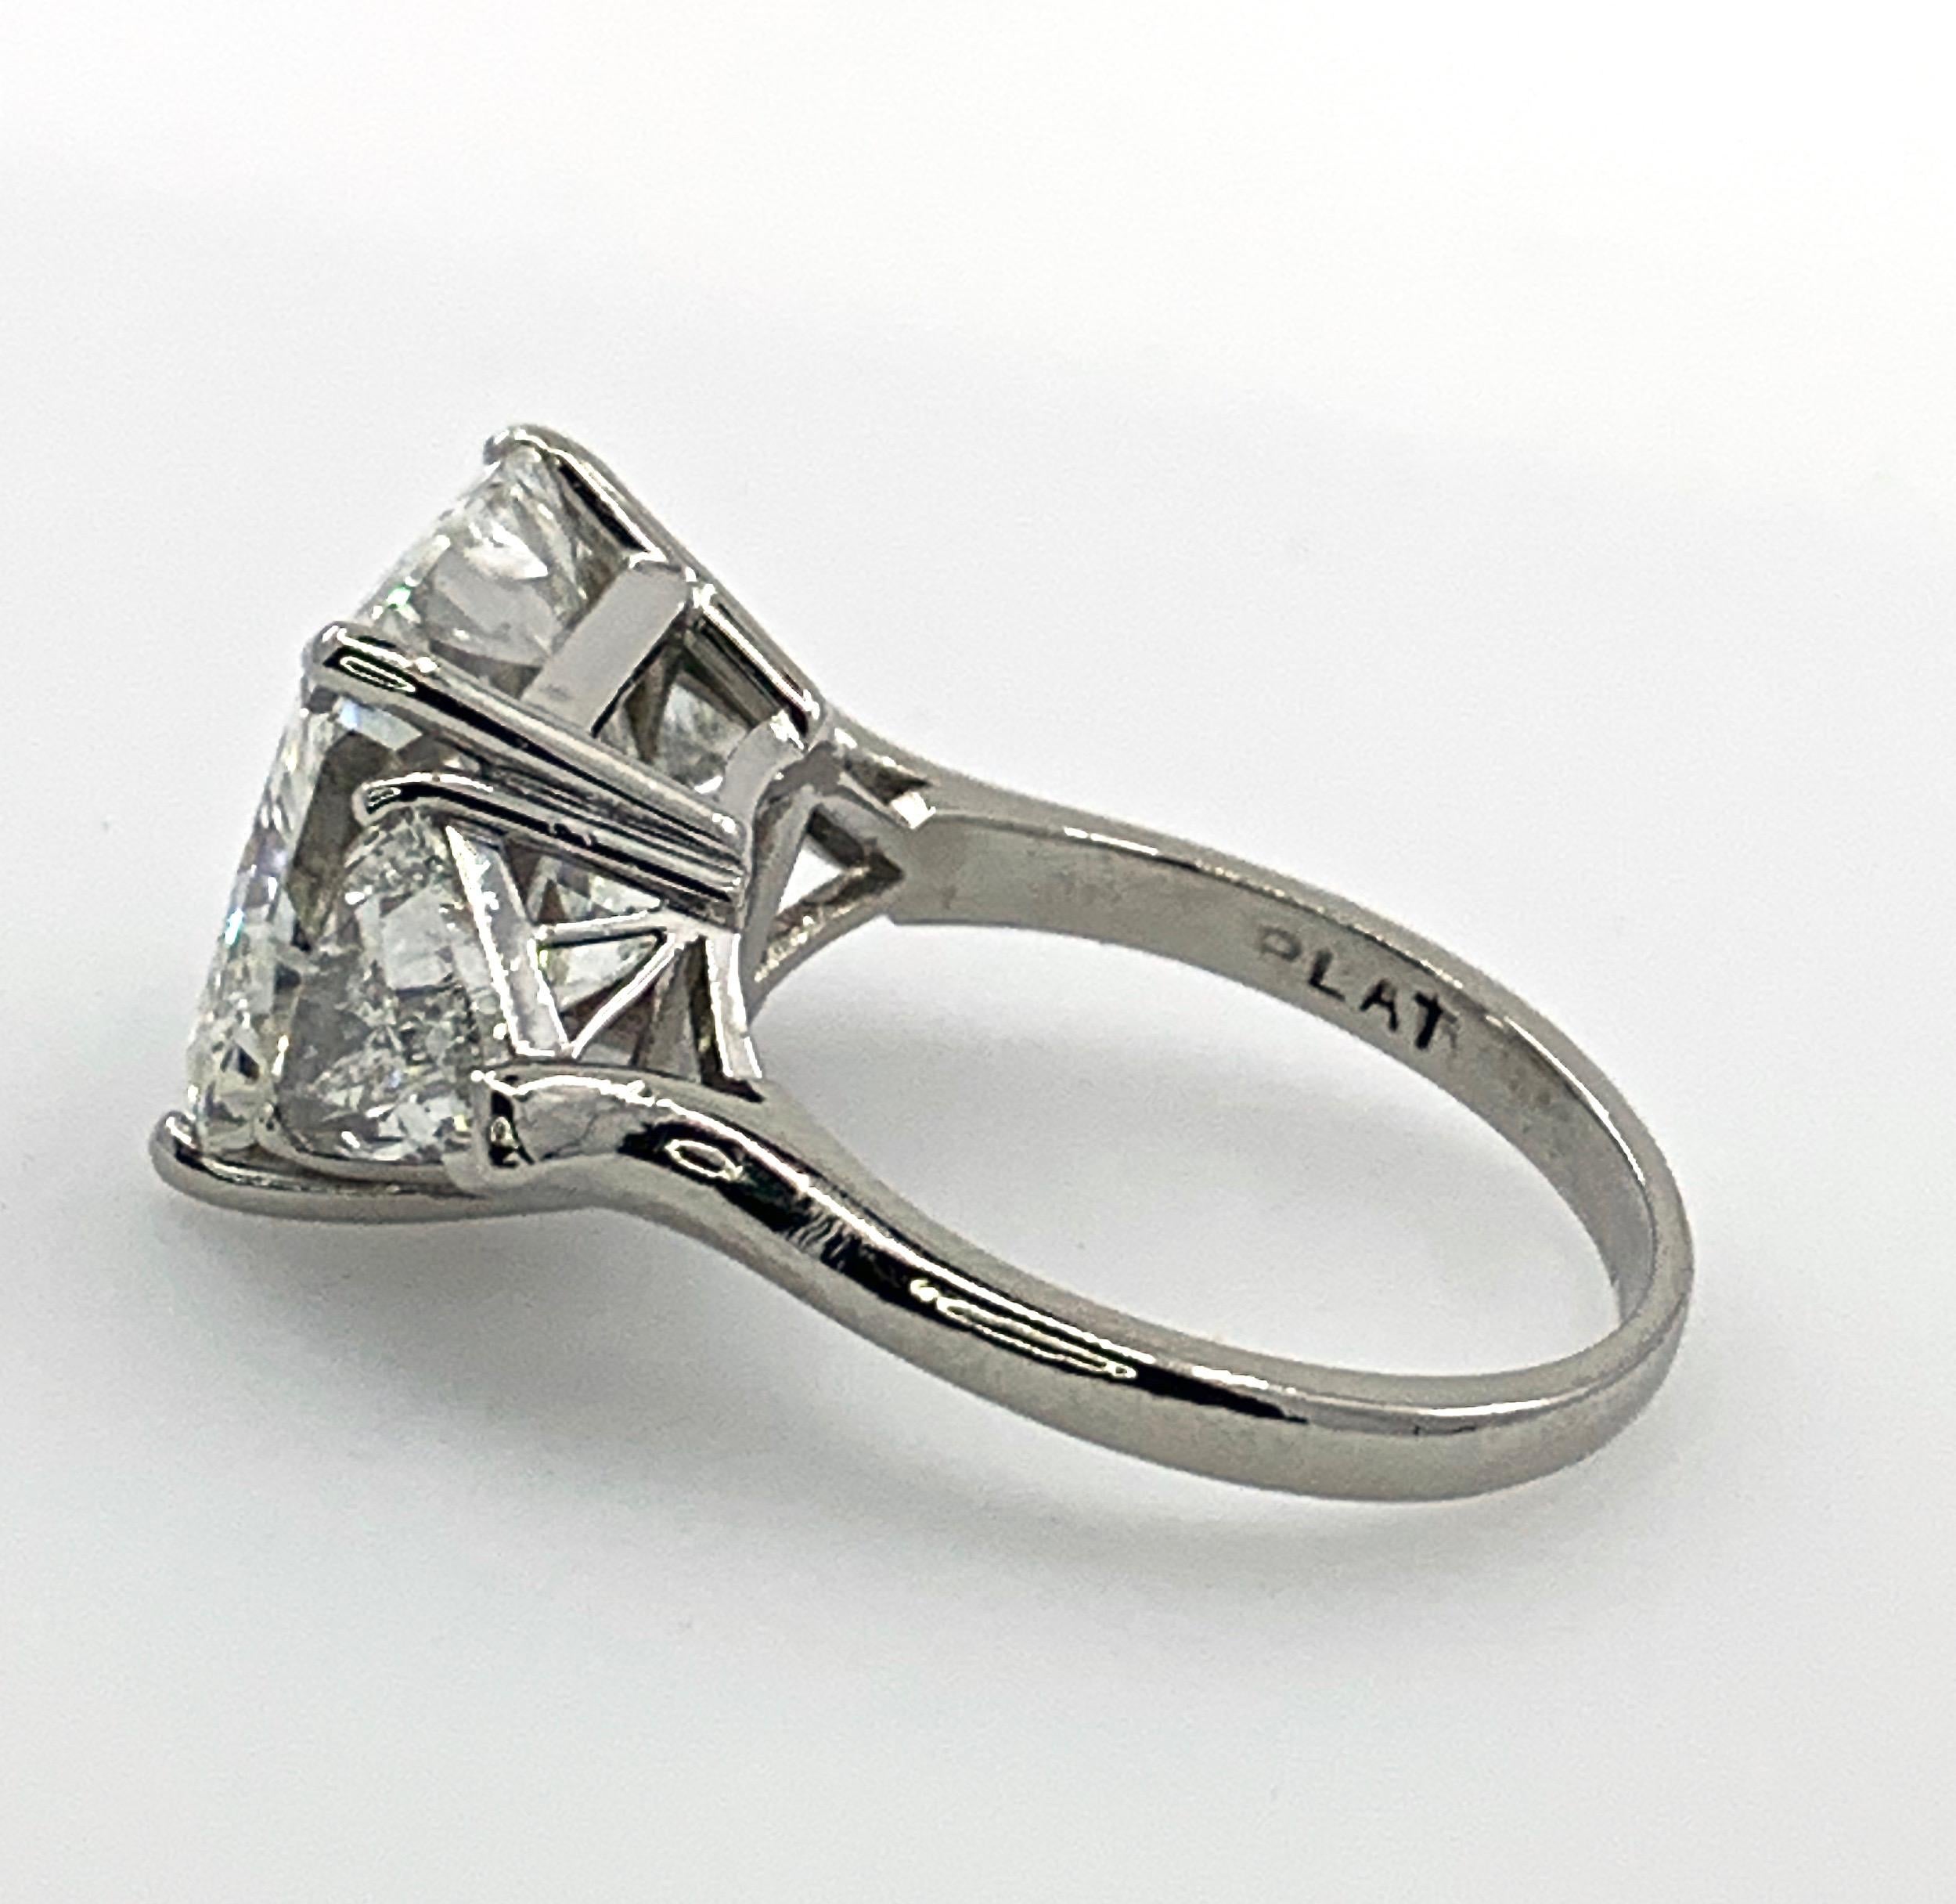 Contemporary GIA-Certified 7.27 Carat Radiant-Cut Diamond Ring with 0.75 Carat Side Trillions